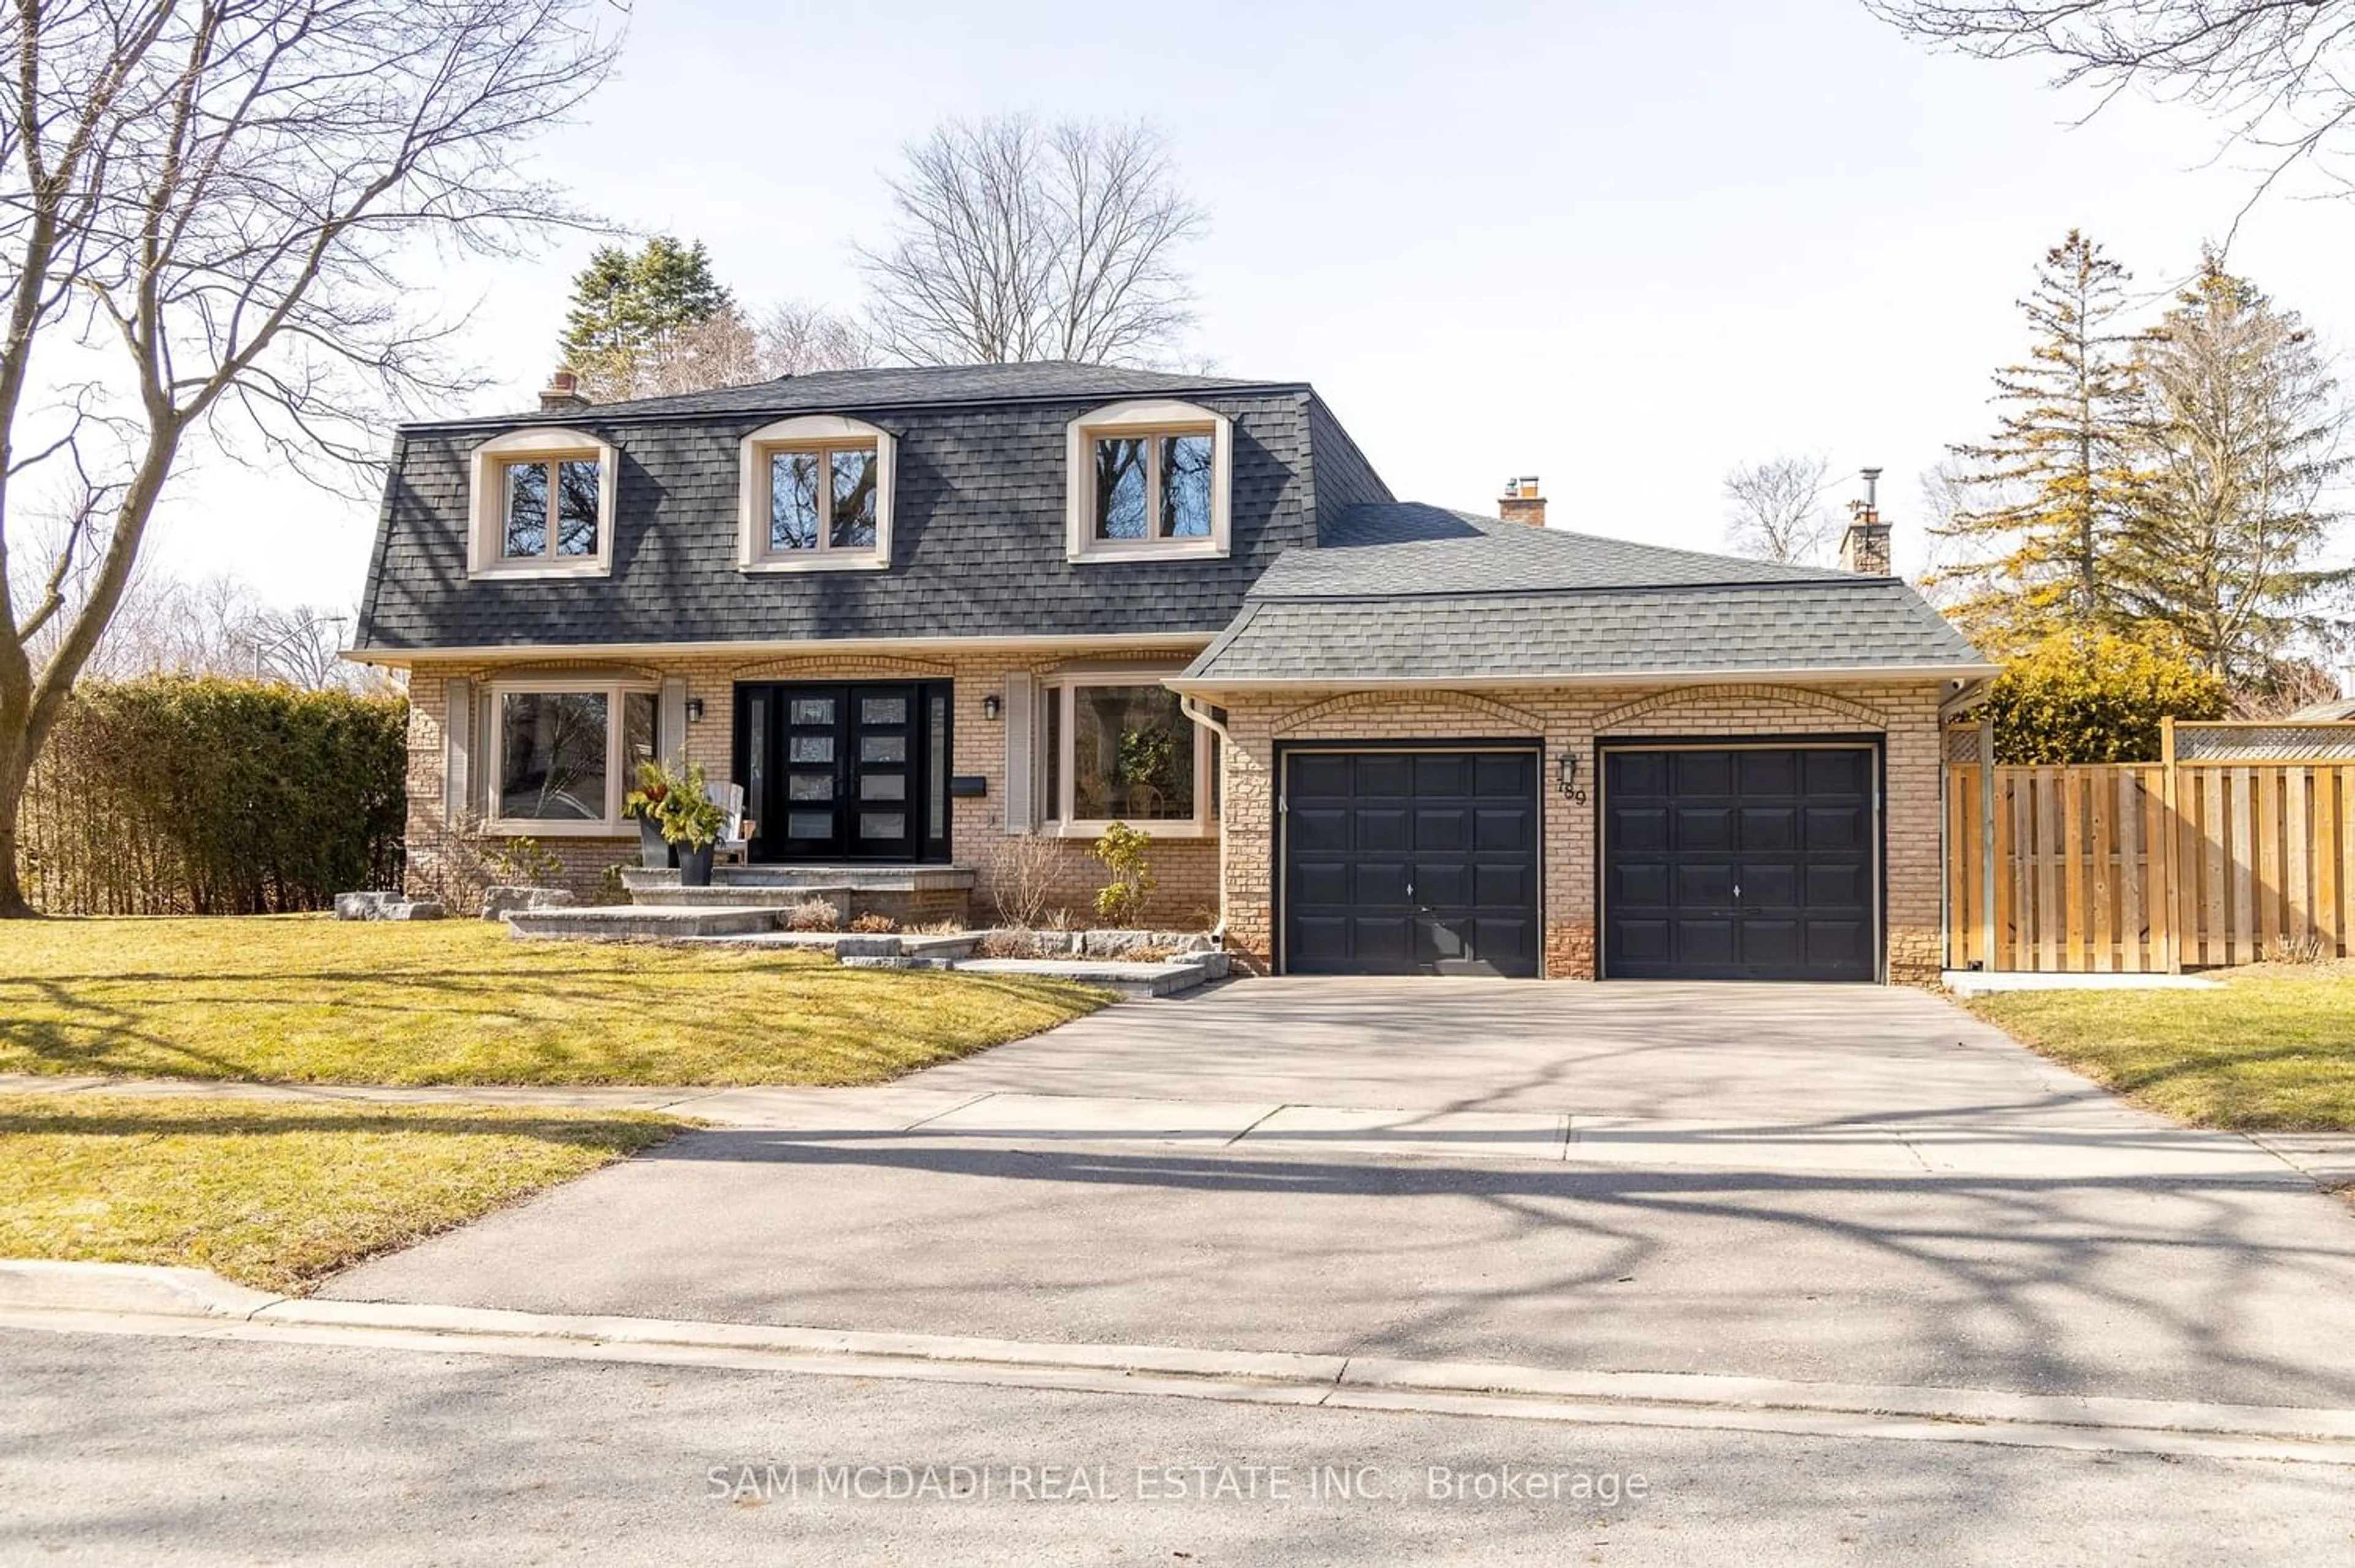 Home with brick exterior material for 789 Edistel Cres, Mississauga Ontario L5H 1T3